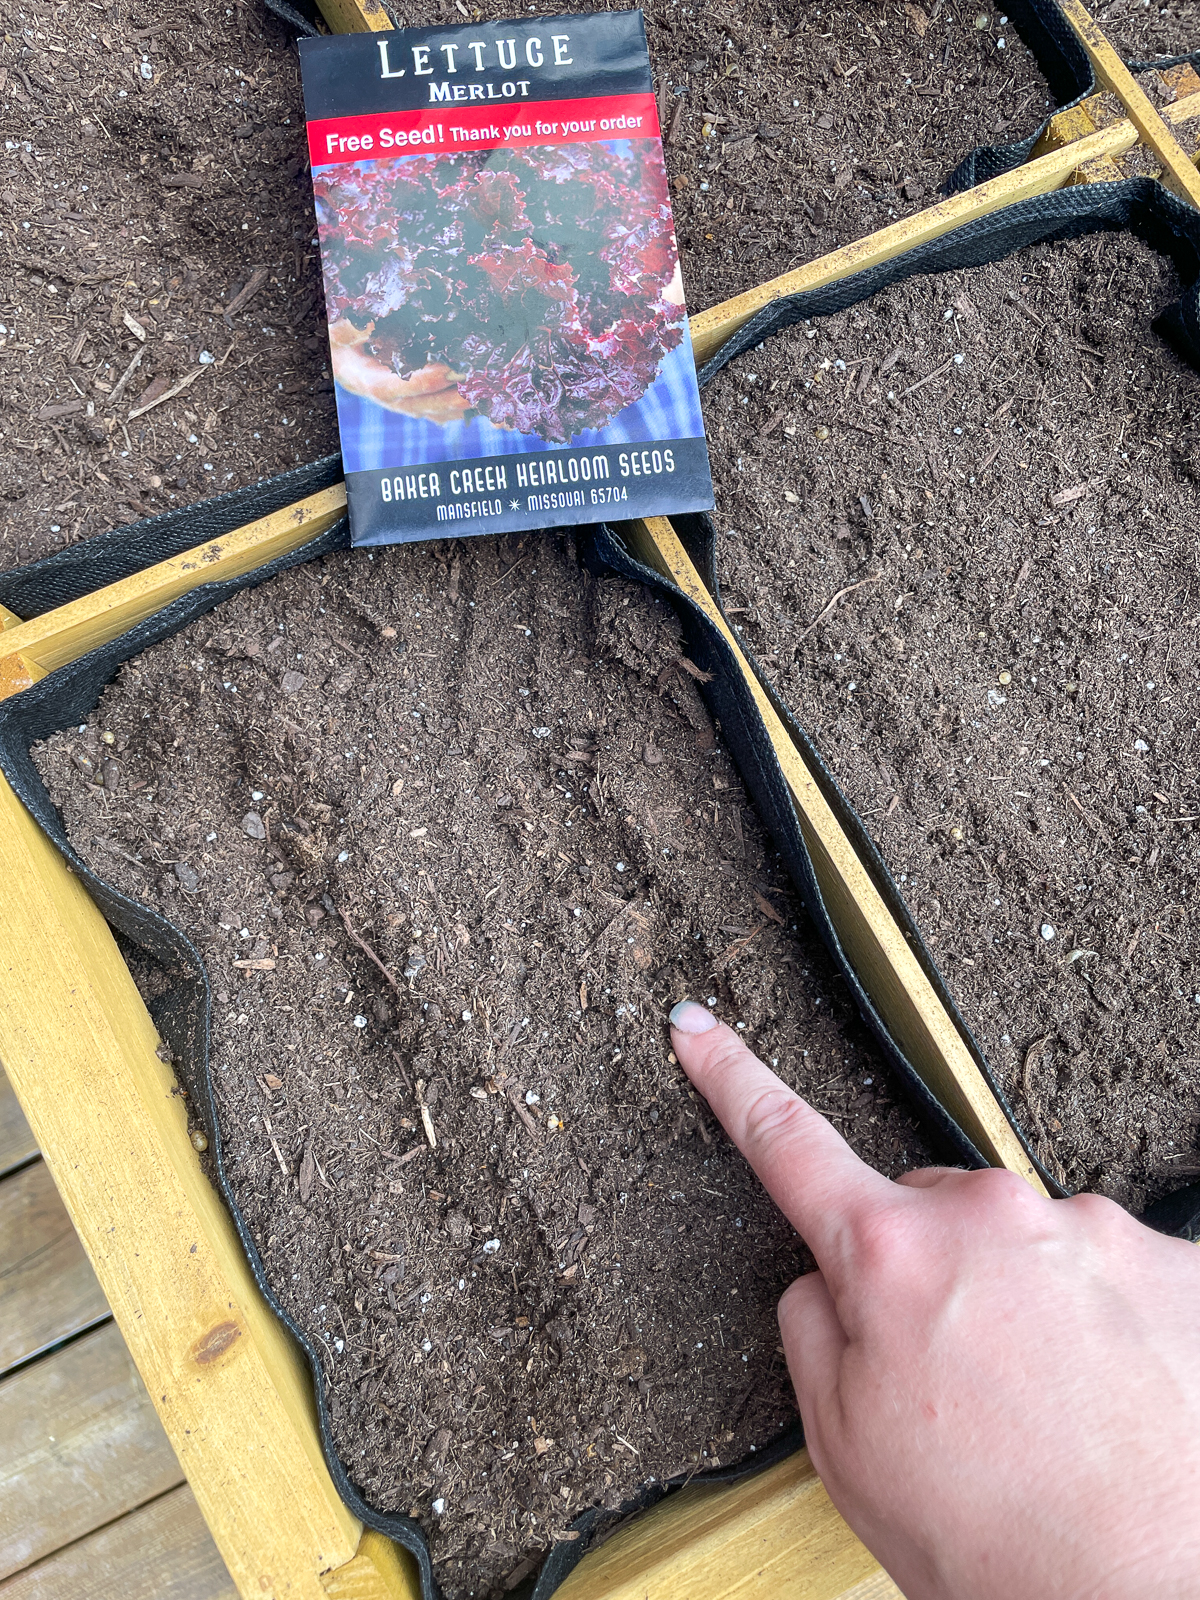 creating rows for sowing lettuce seeds in a grow bag